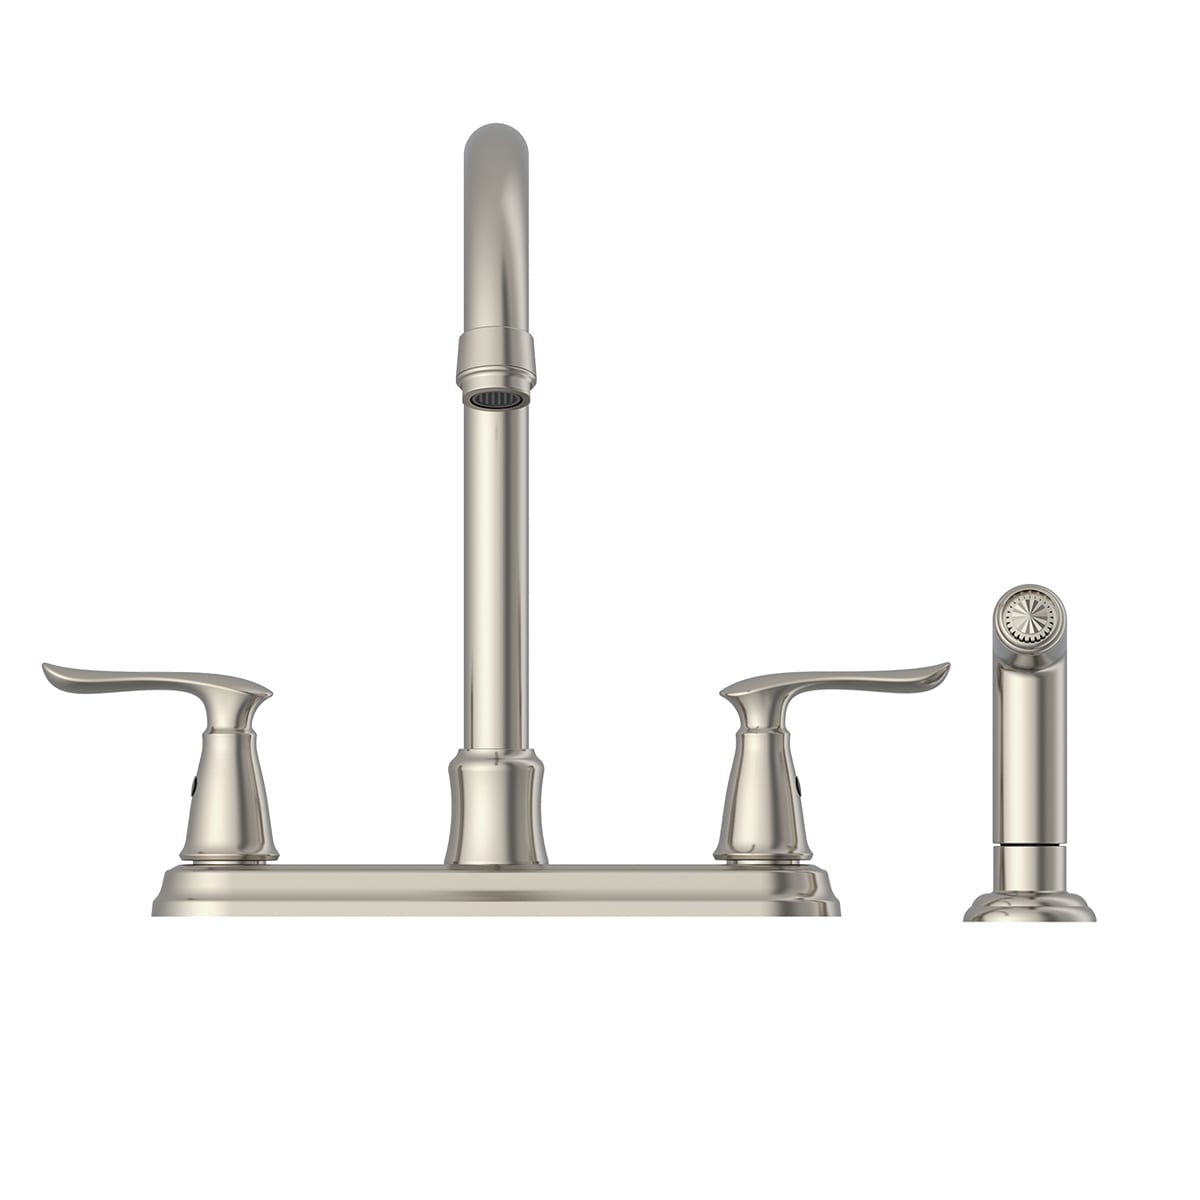 Project Source Brice Stainless Steel Double Handle High-arc Kitchen Faucet  with Deck Plate and Side Spray Included